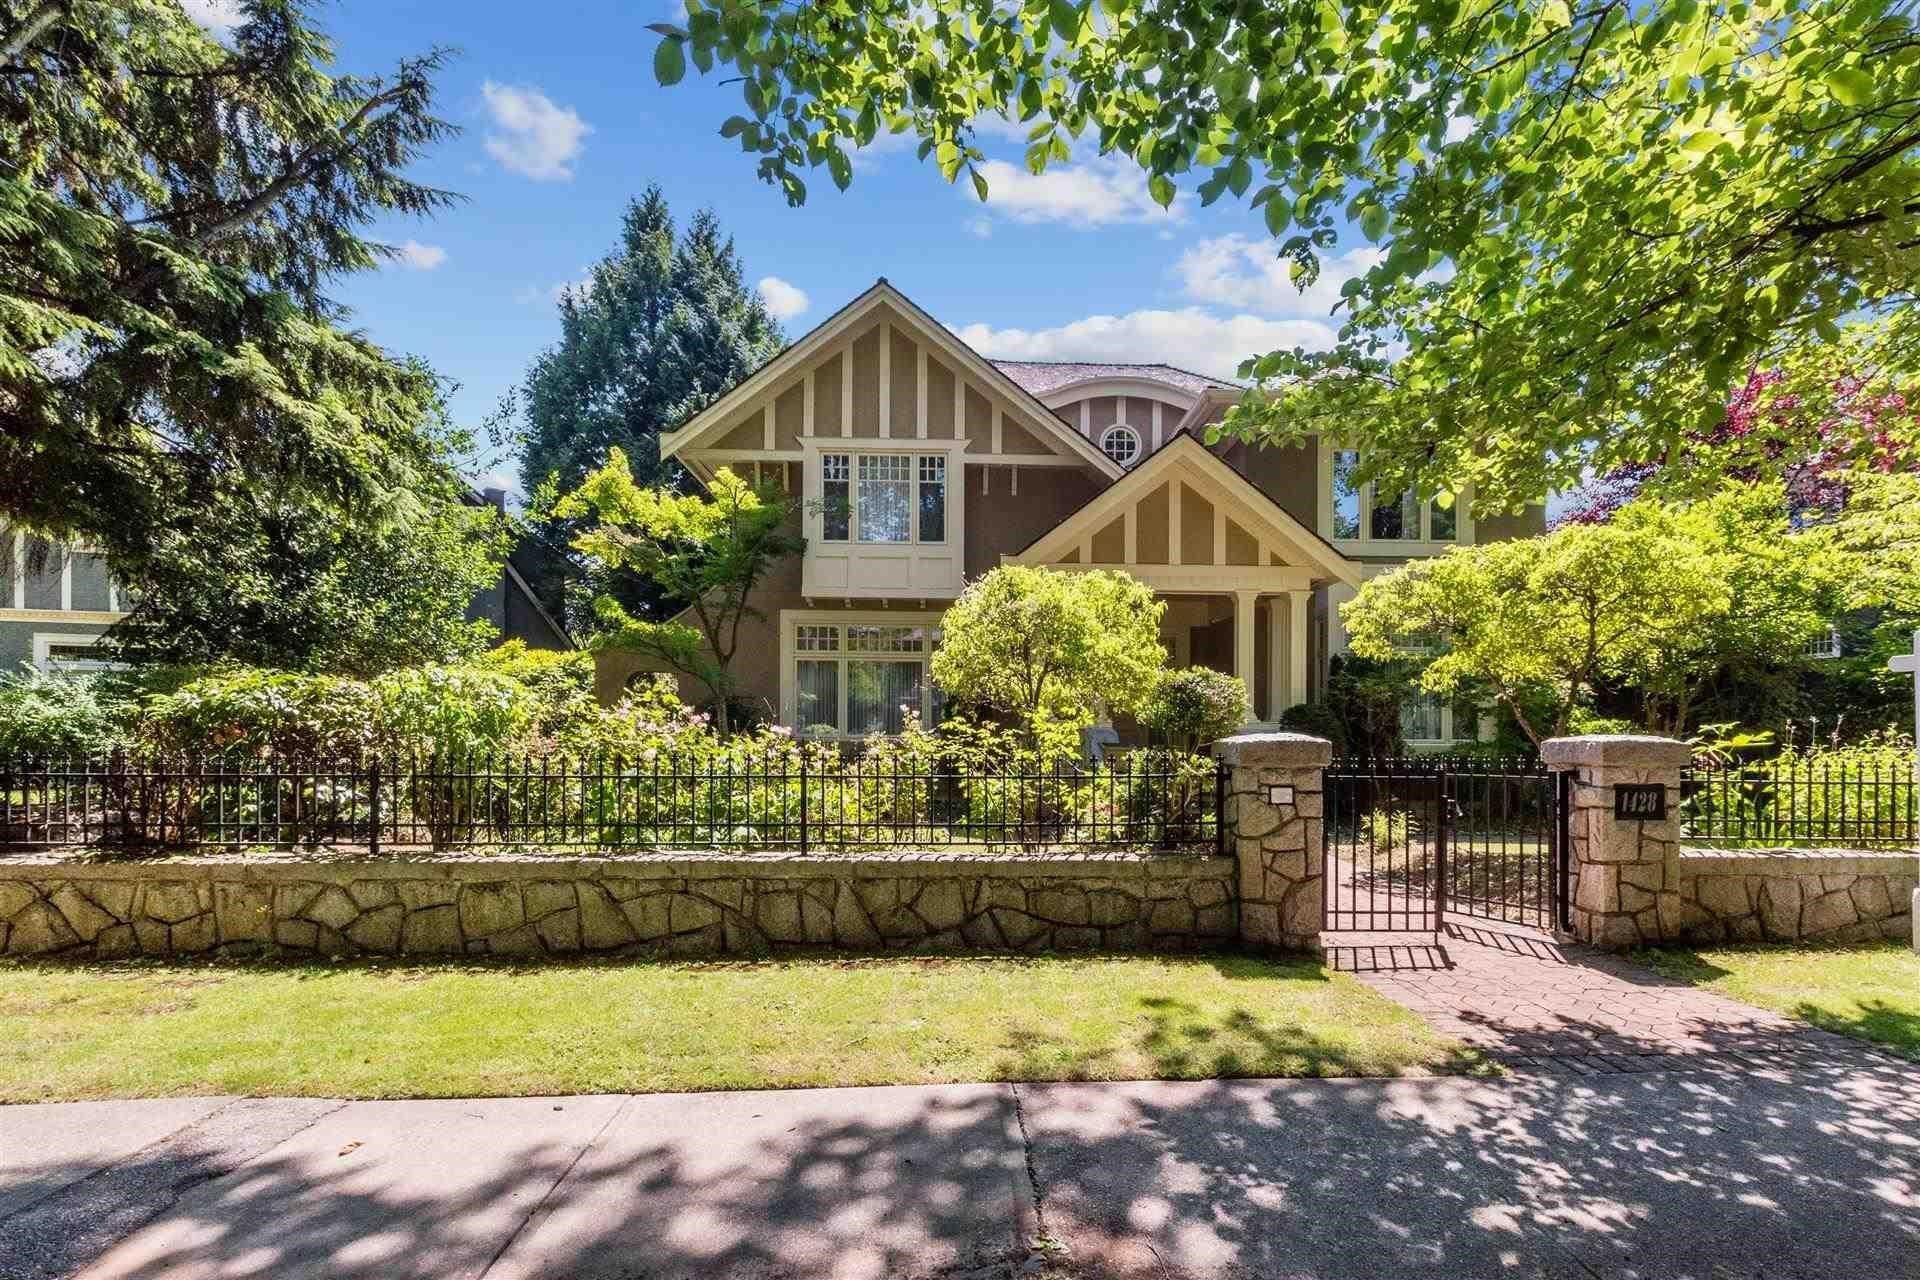 New property listed in Shaughnessy, Vancouver West